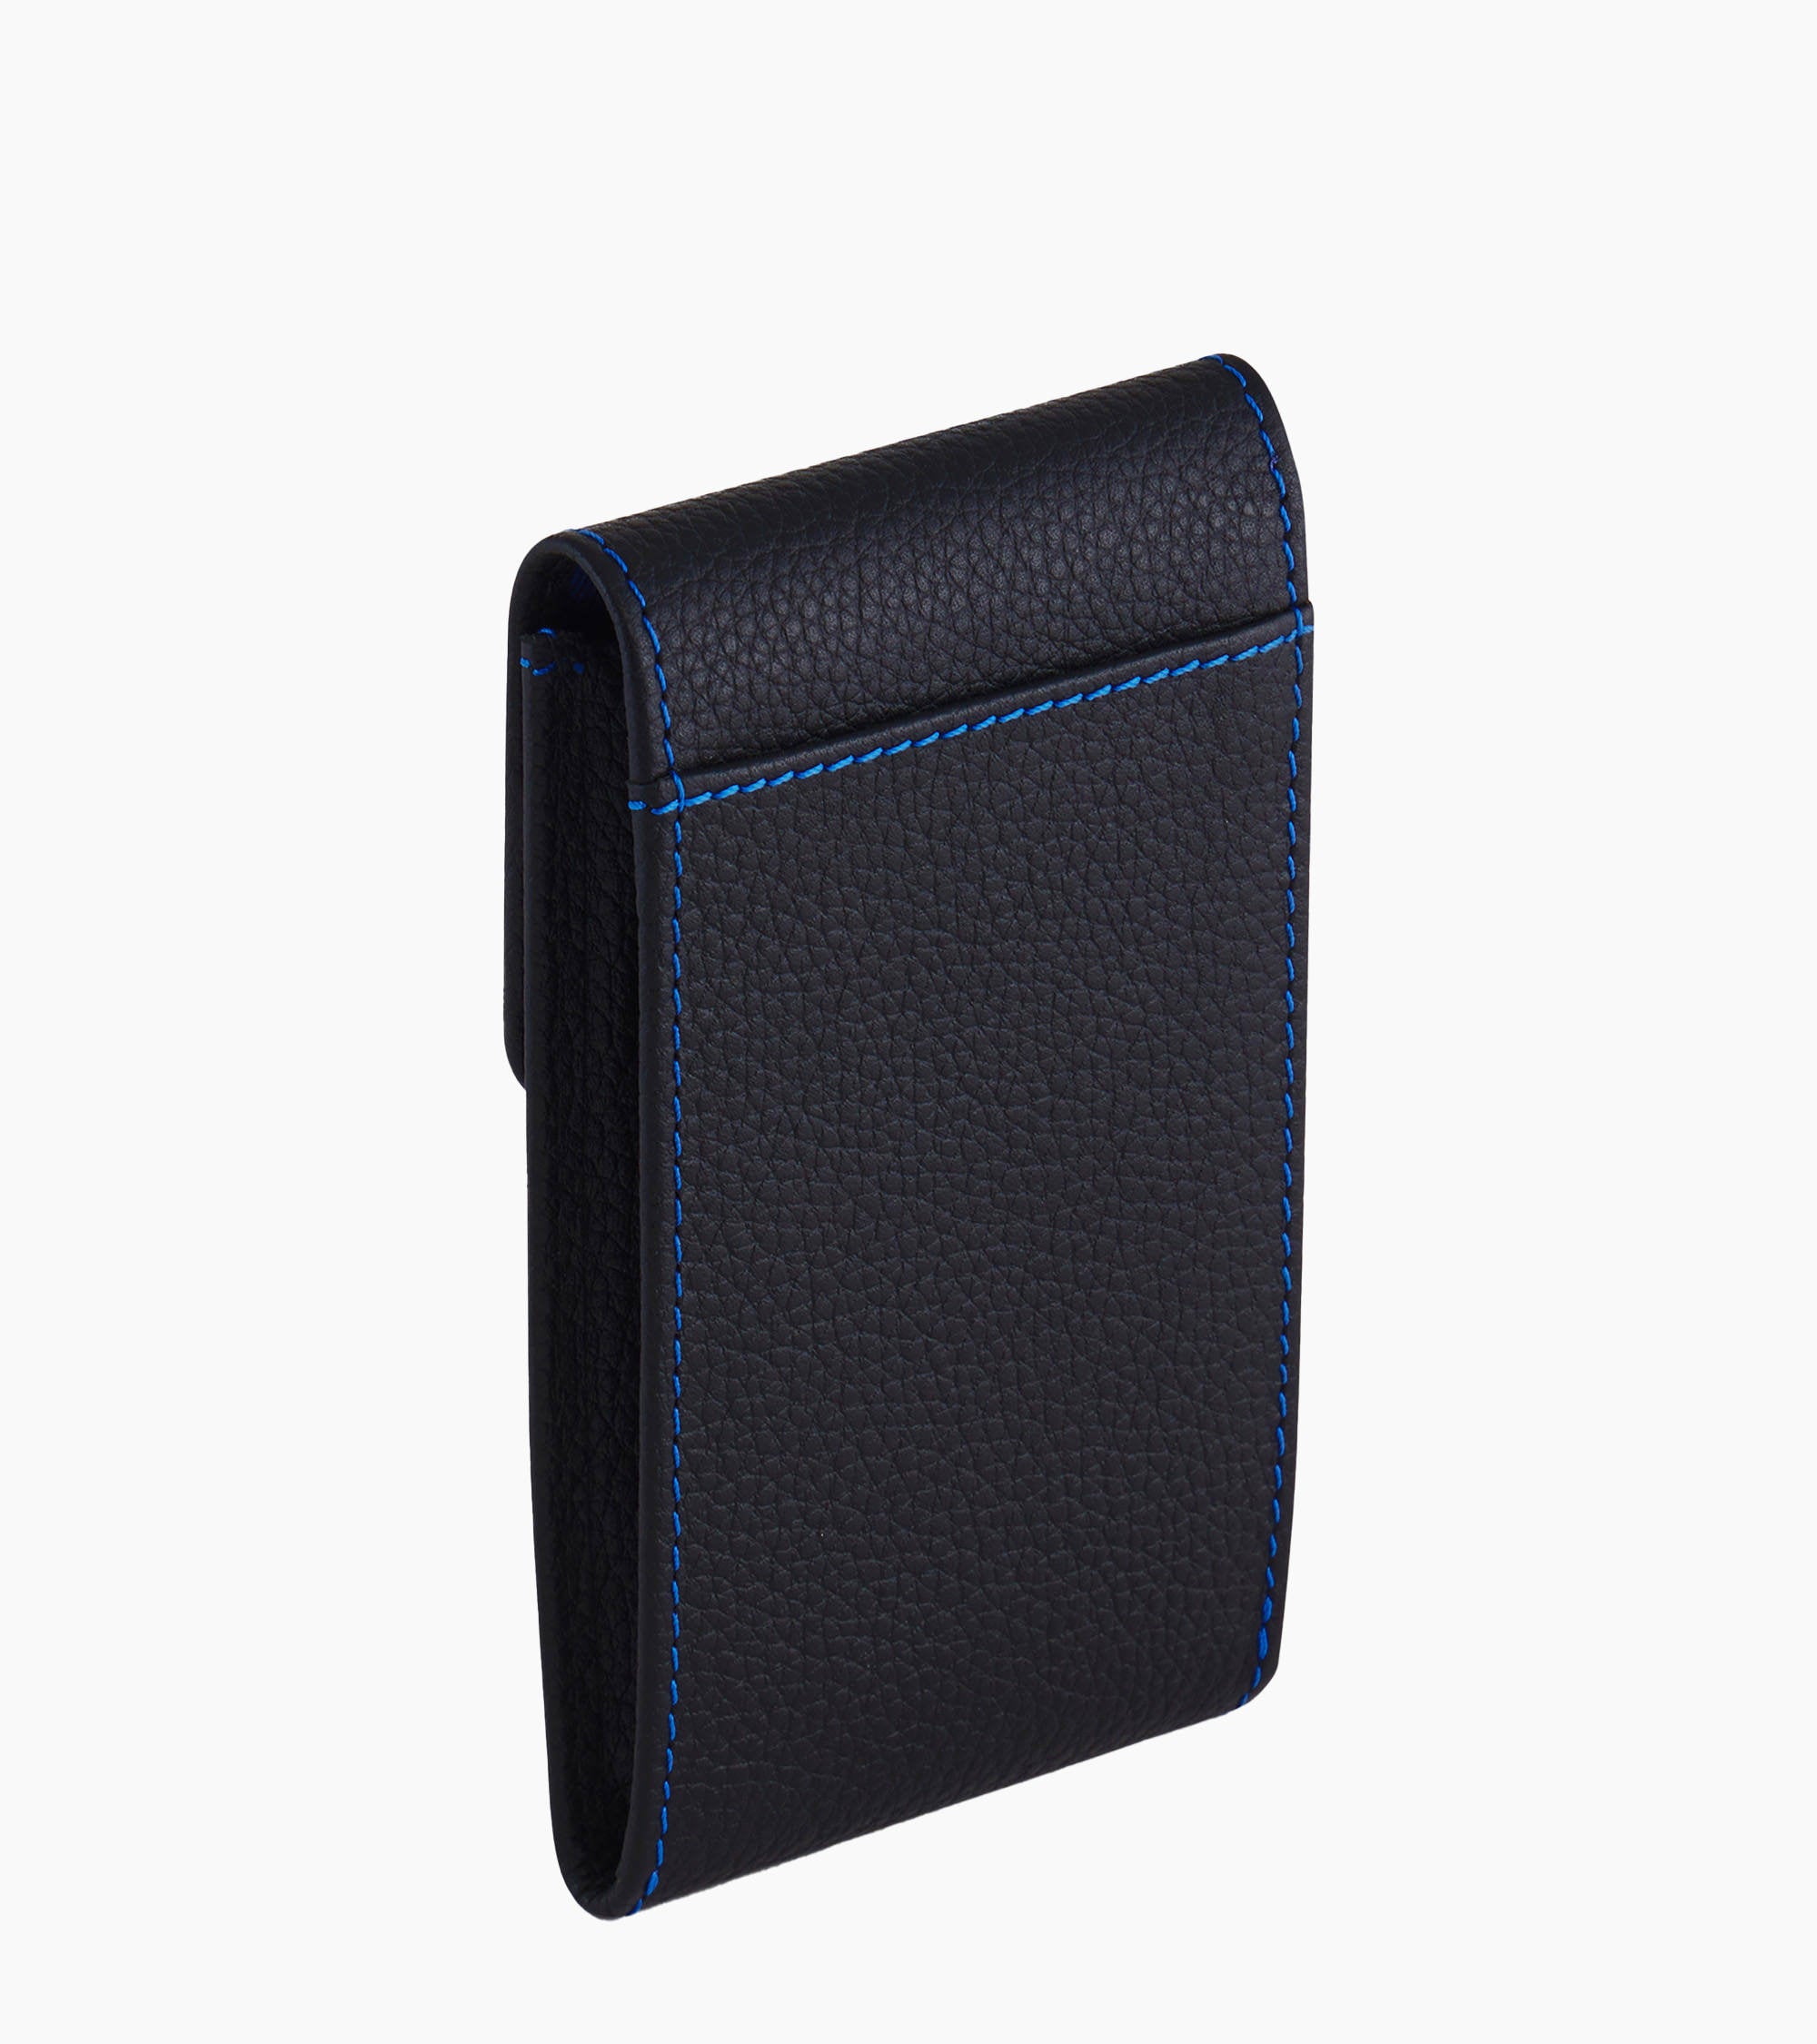 Charles key case with flap closure in grained leather